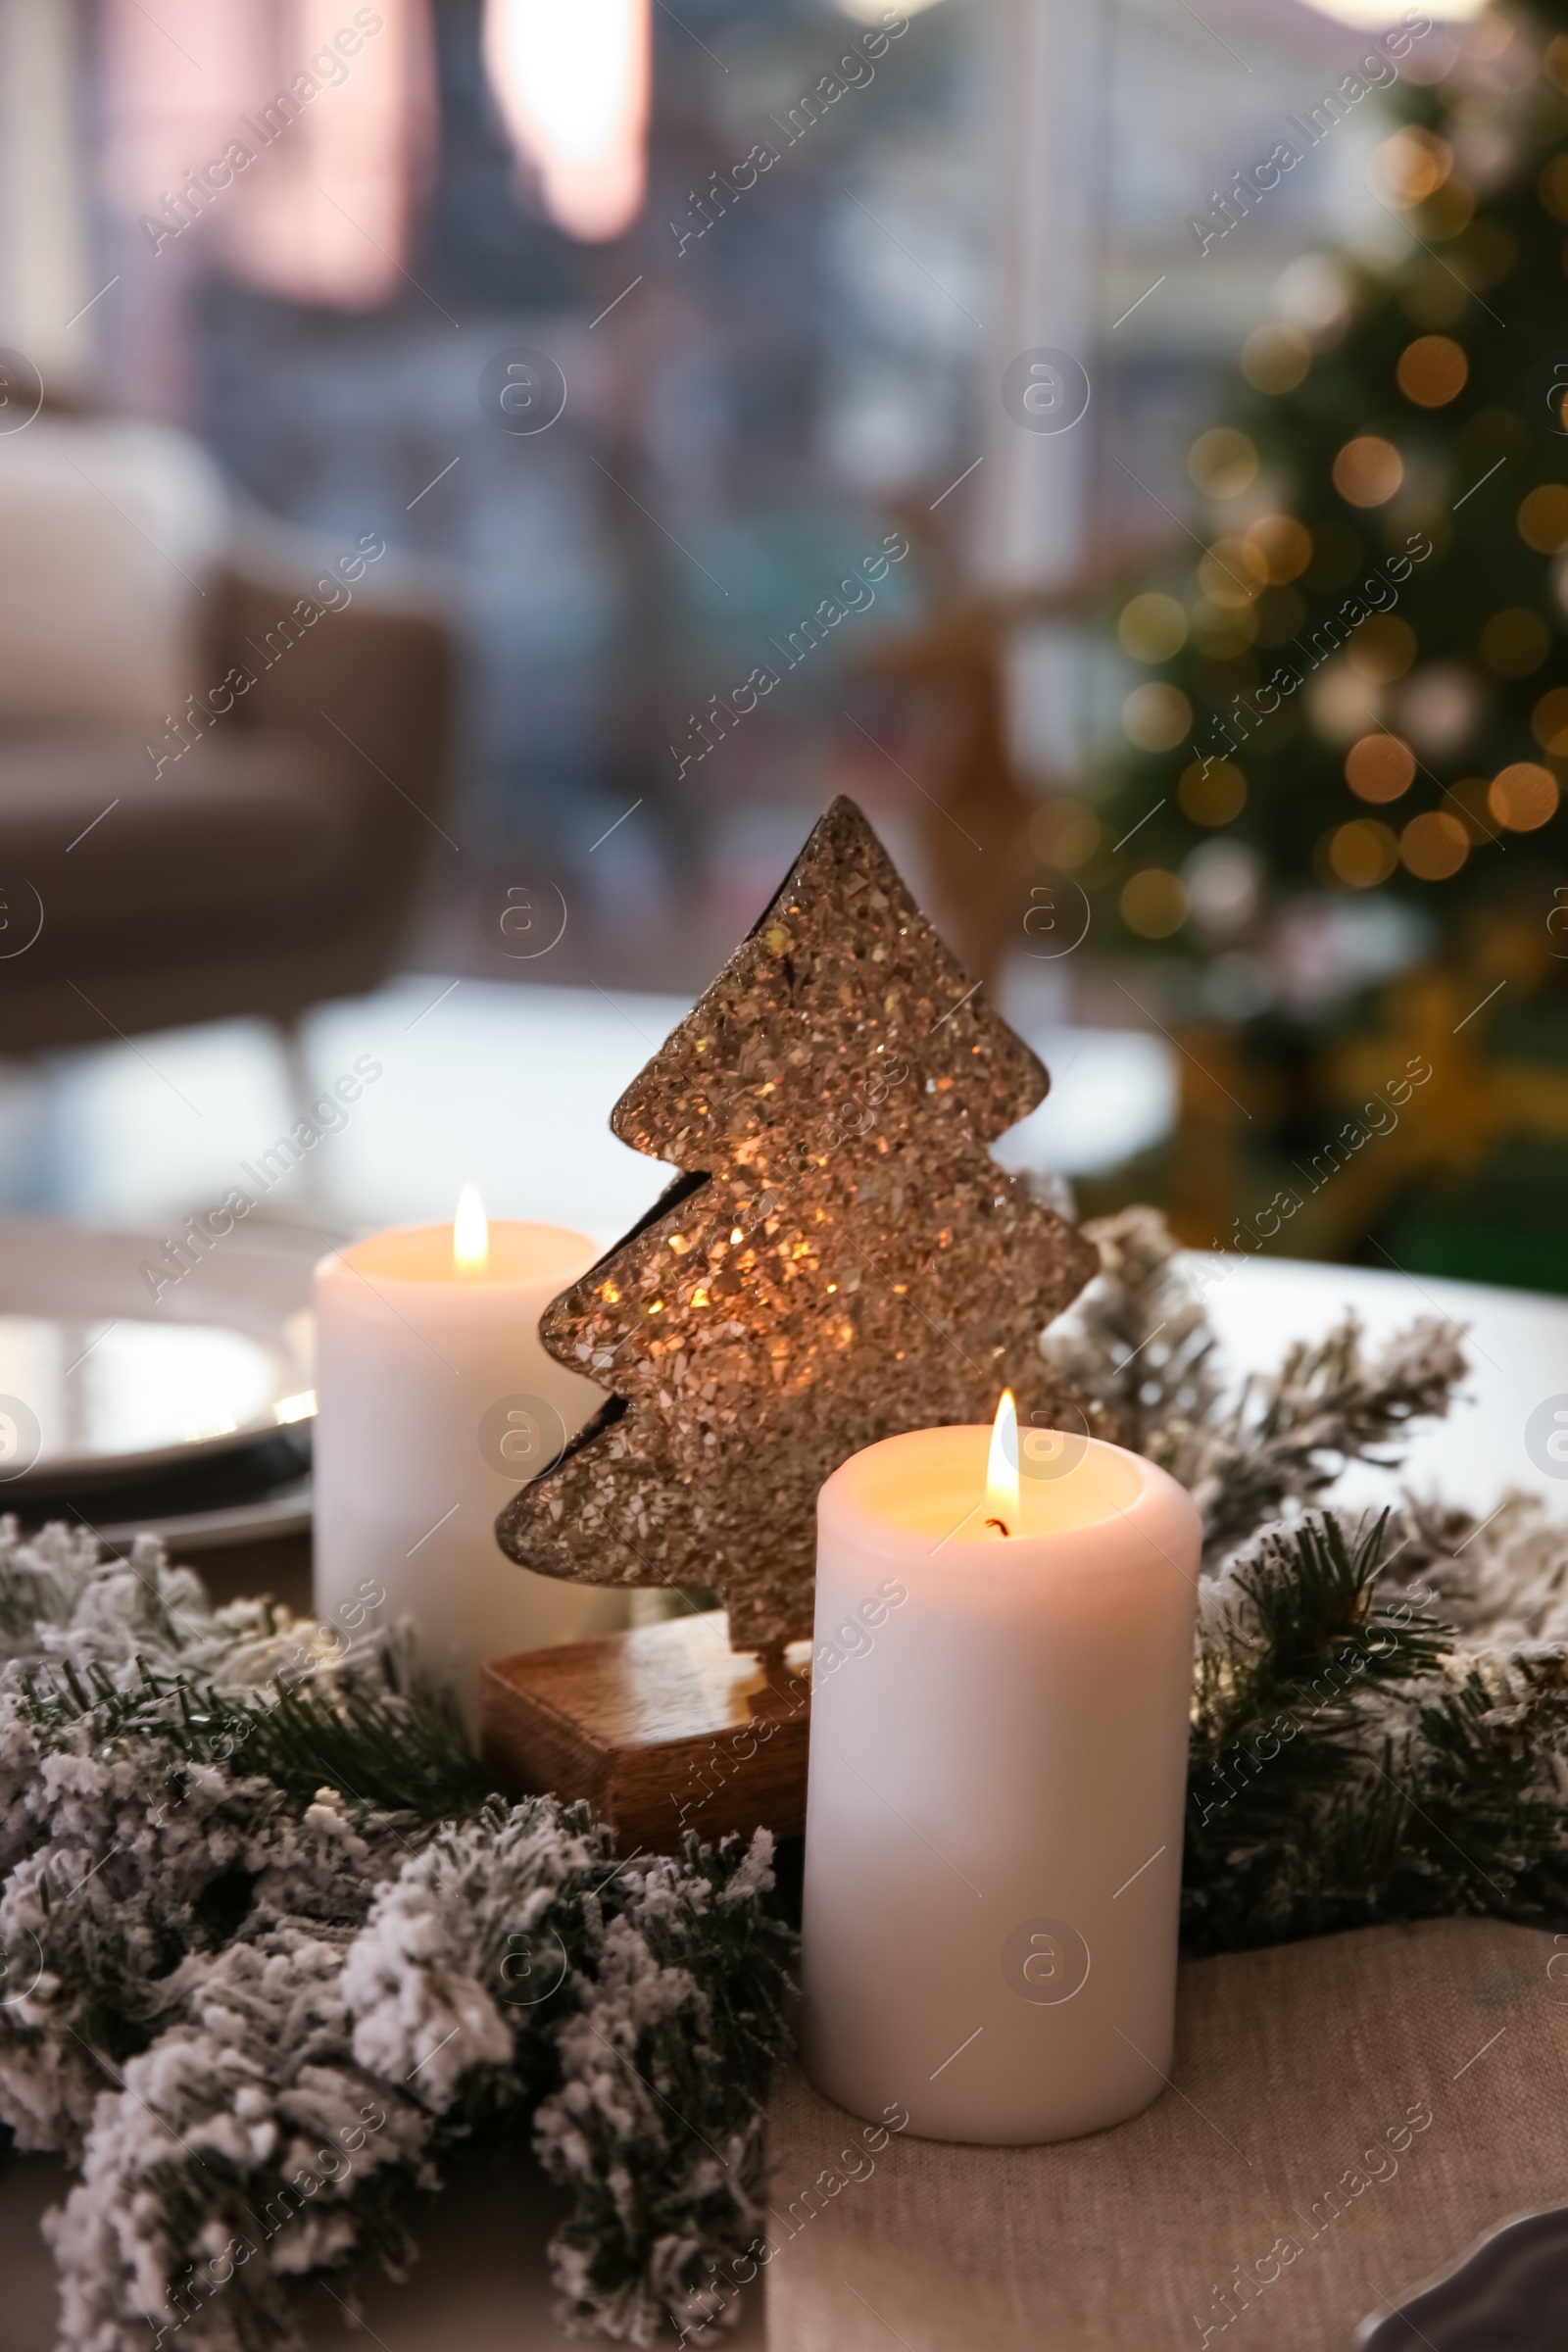 Photo of Elegant table setting with Christmas decor indoors